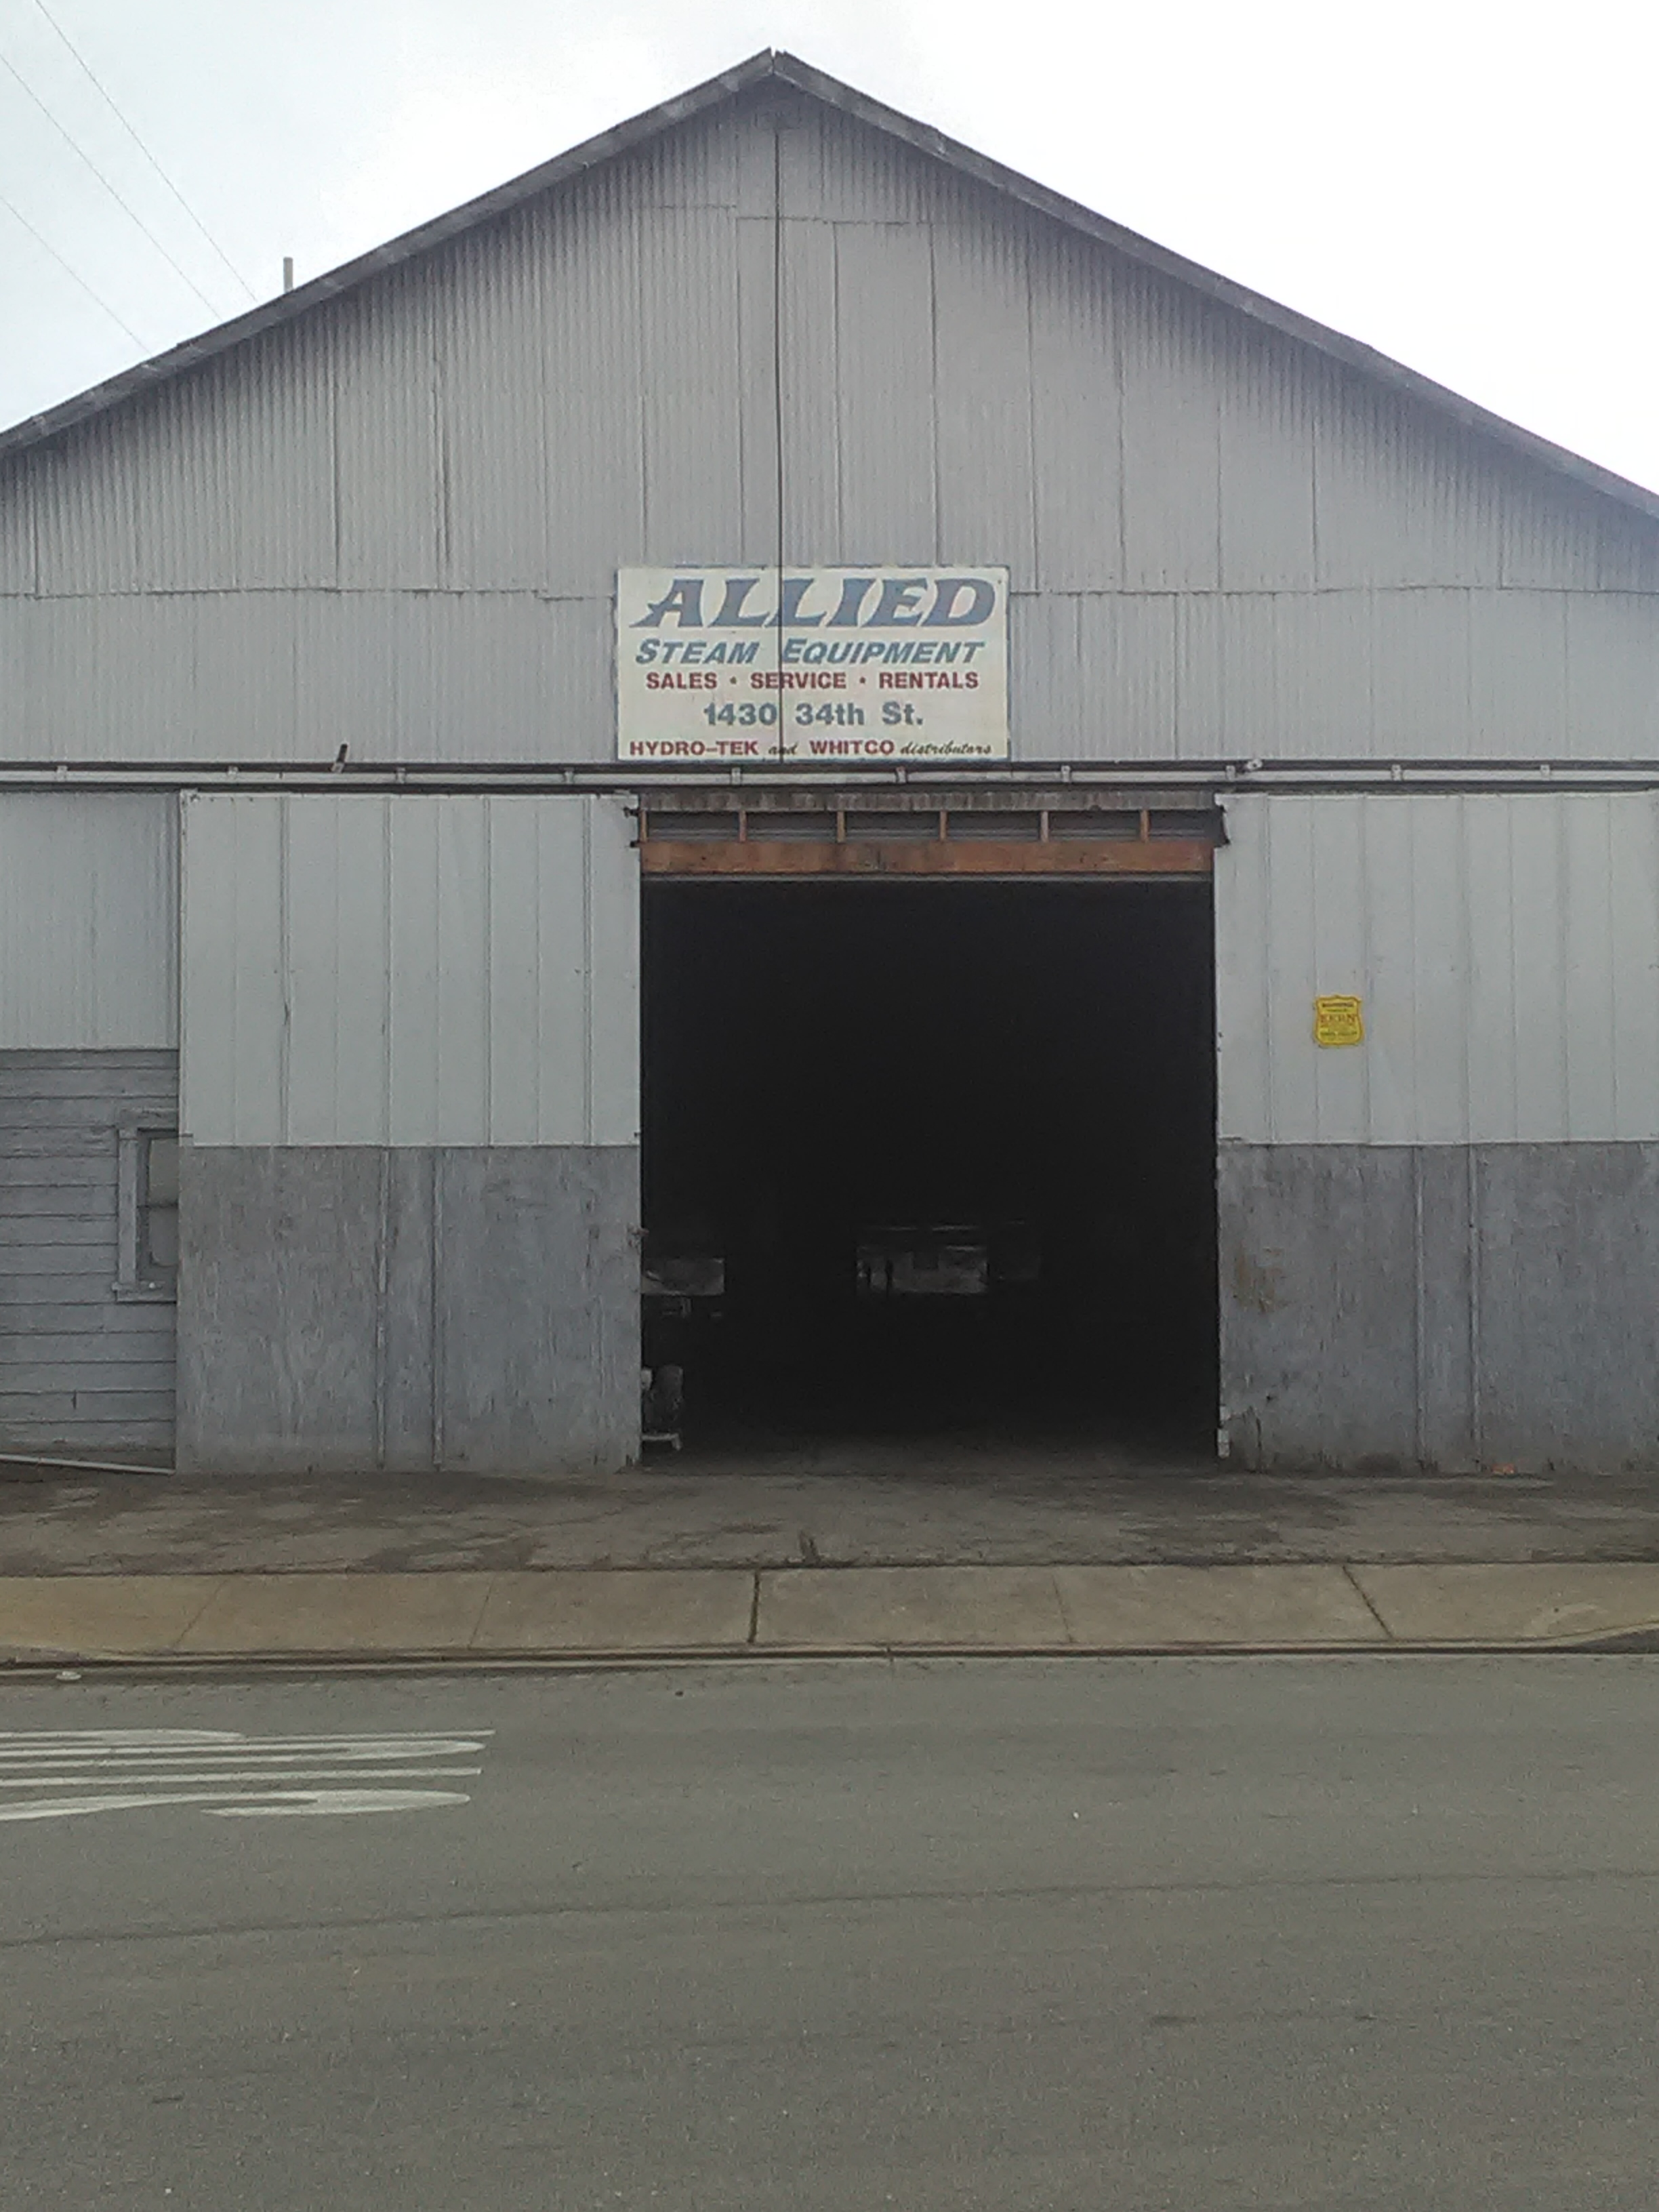 Allied Steam Equipment 1430 34th St, Bakersfield, CA 93301 - YP.com